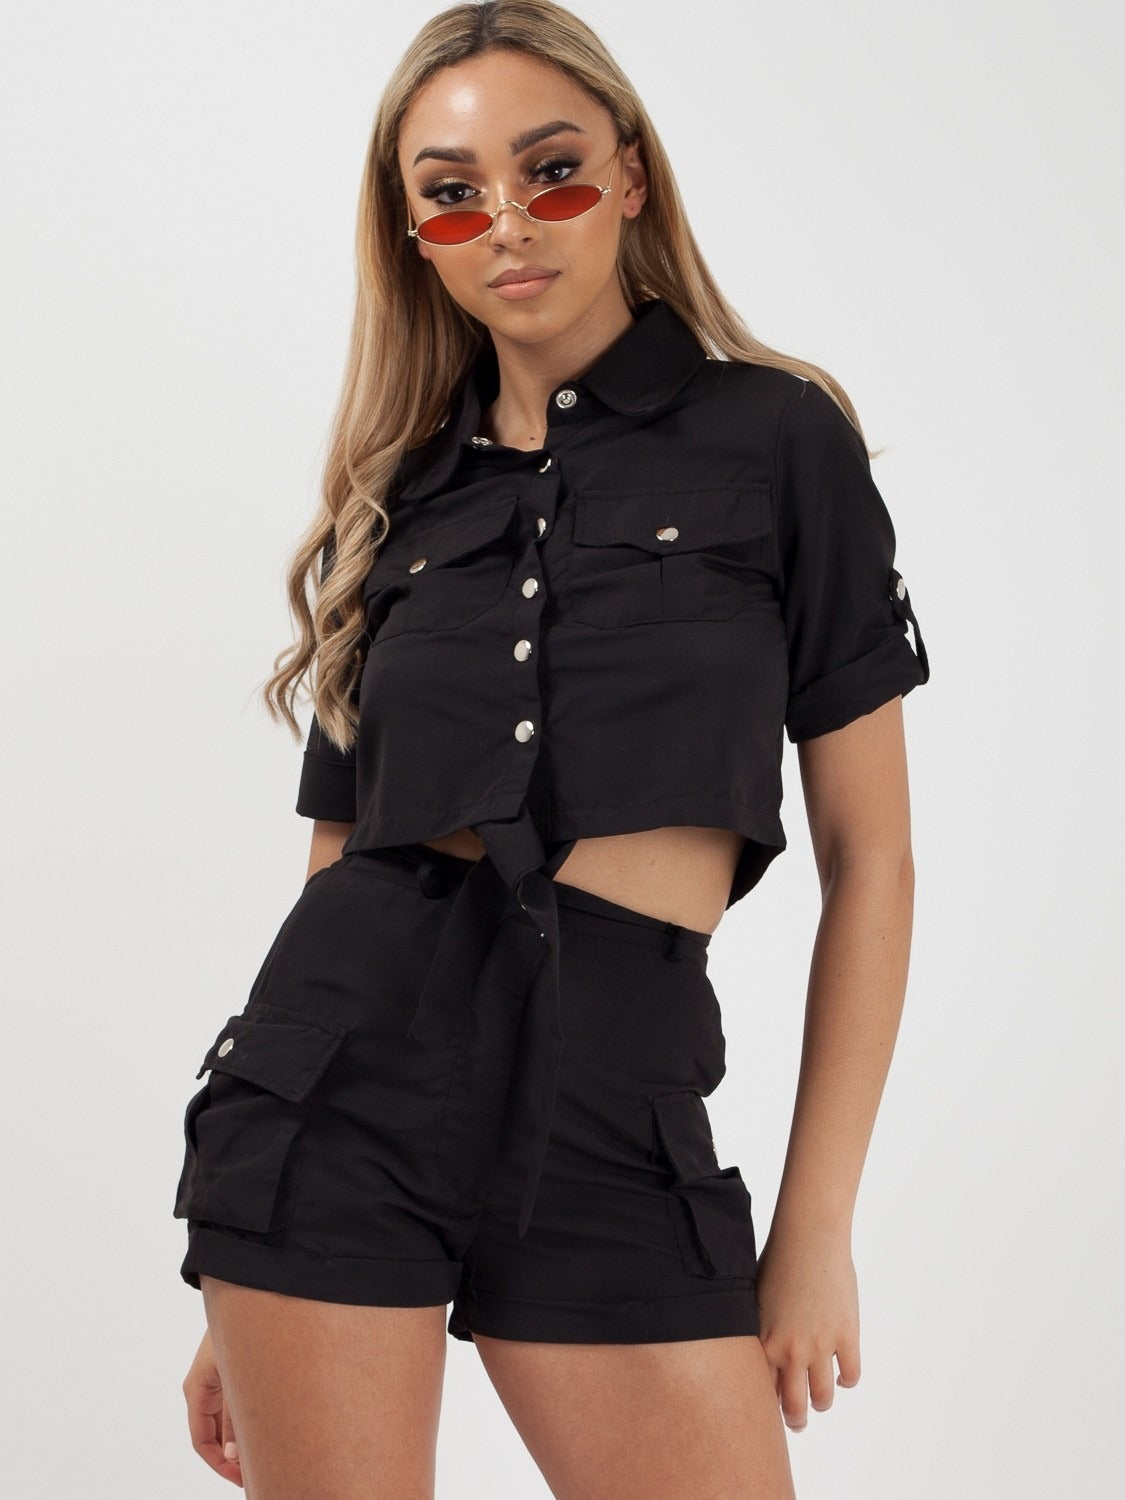 Black Crop Top & Shorts Co-ord Suit - Makayla - Storm Desire